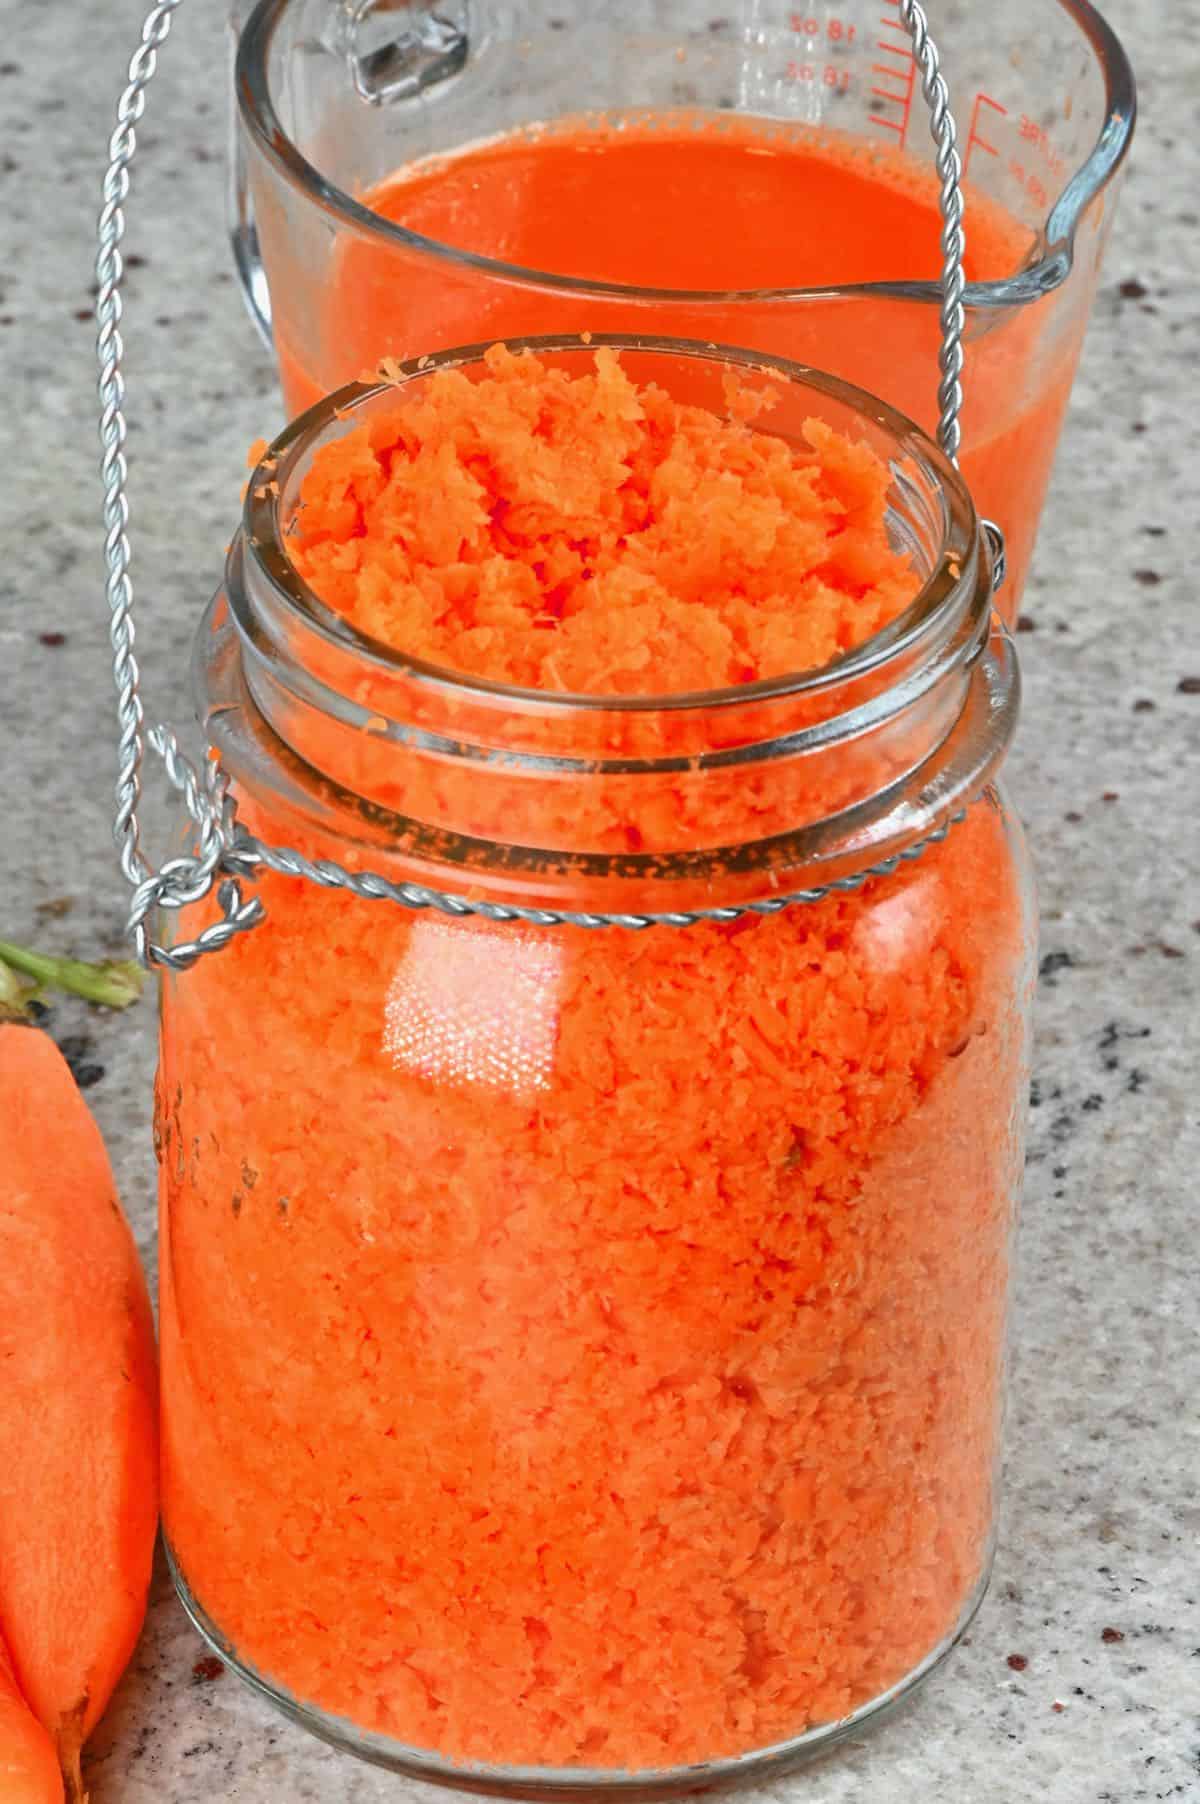 Carrot juice leftover pulp in a container